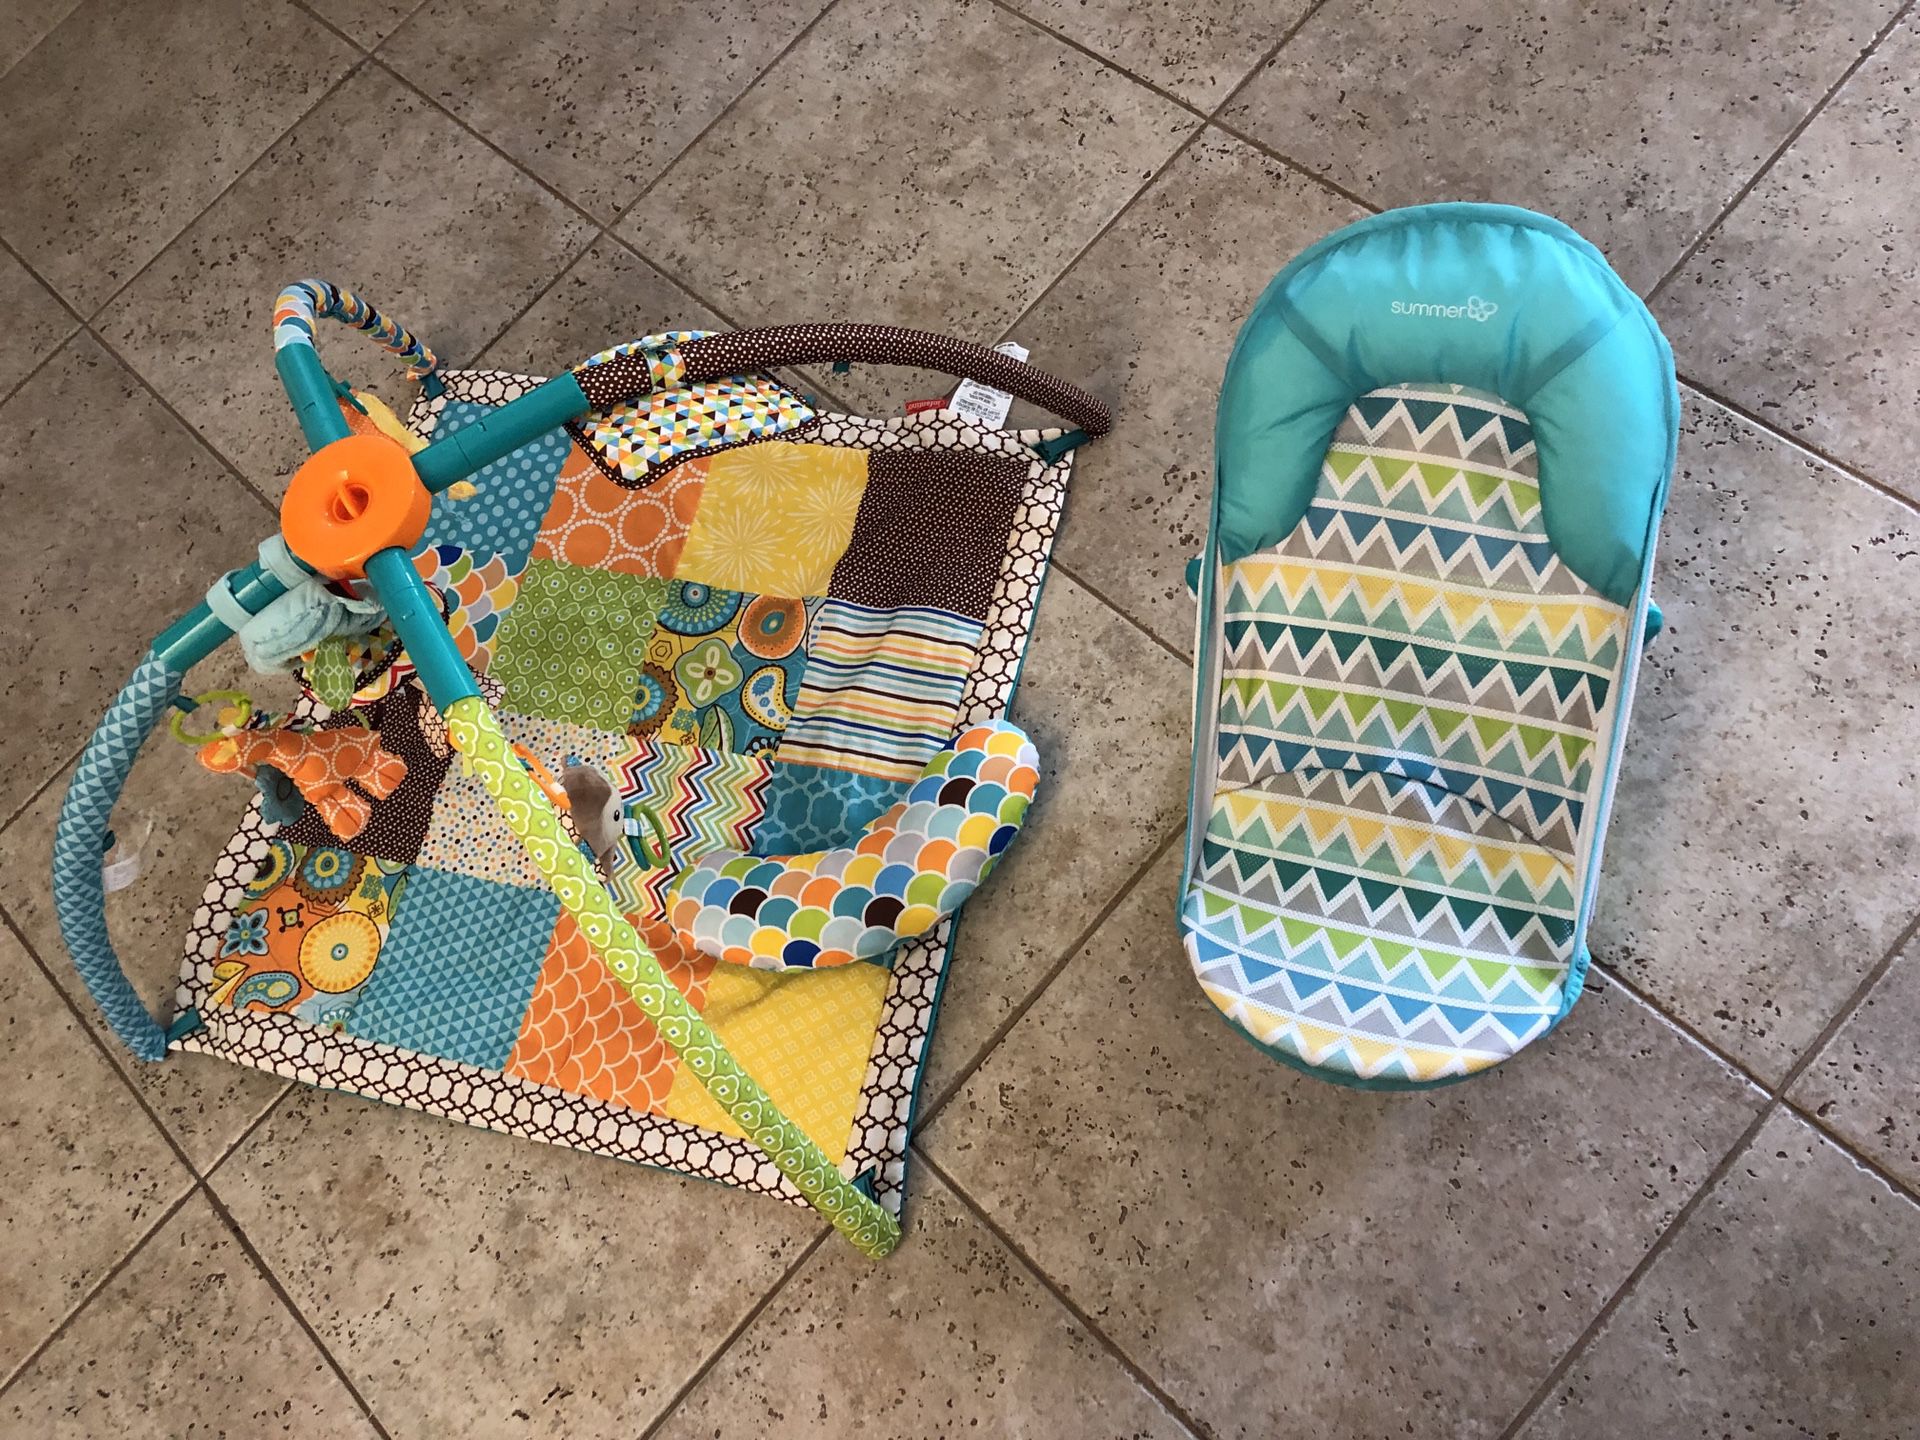 Infant play mat and baby bath NEW